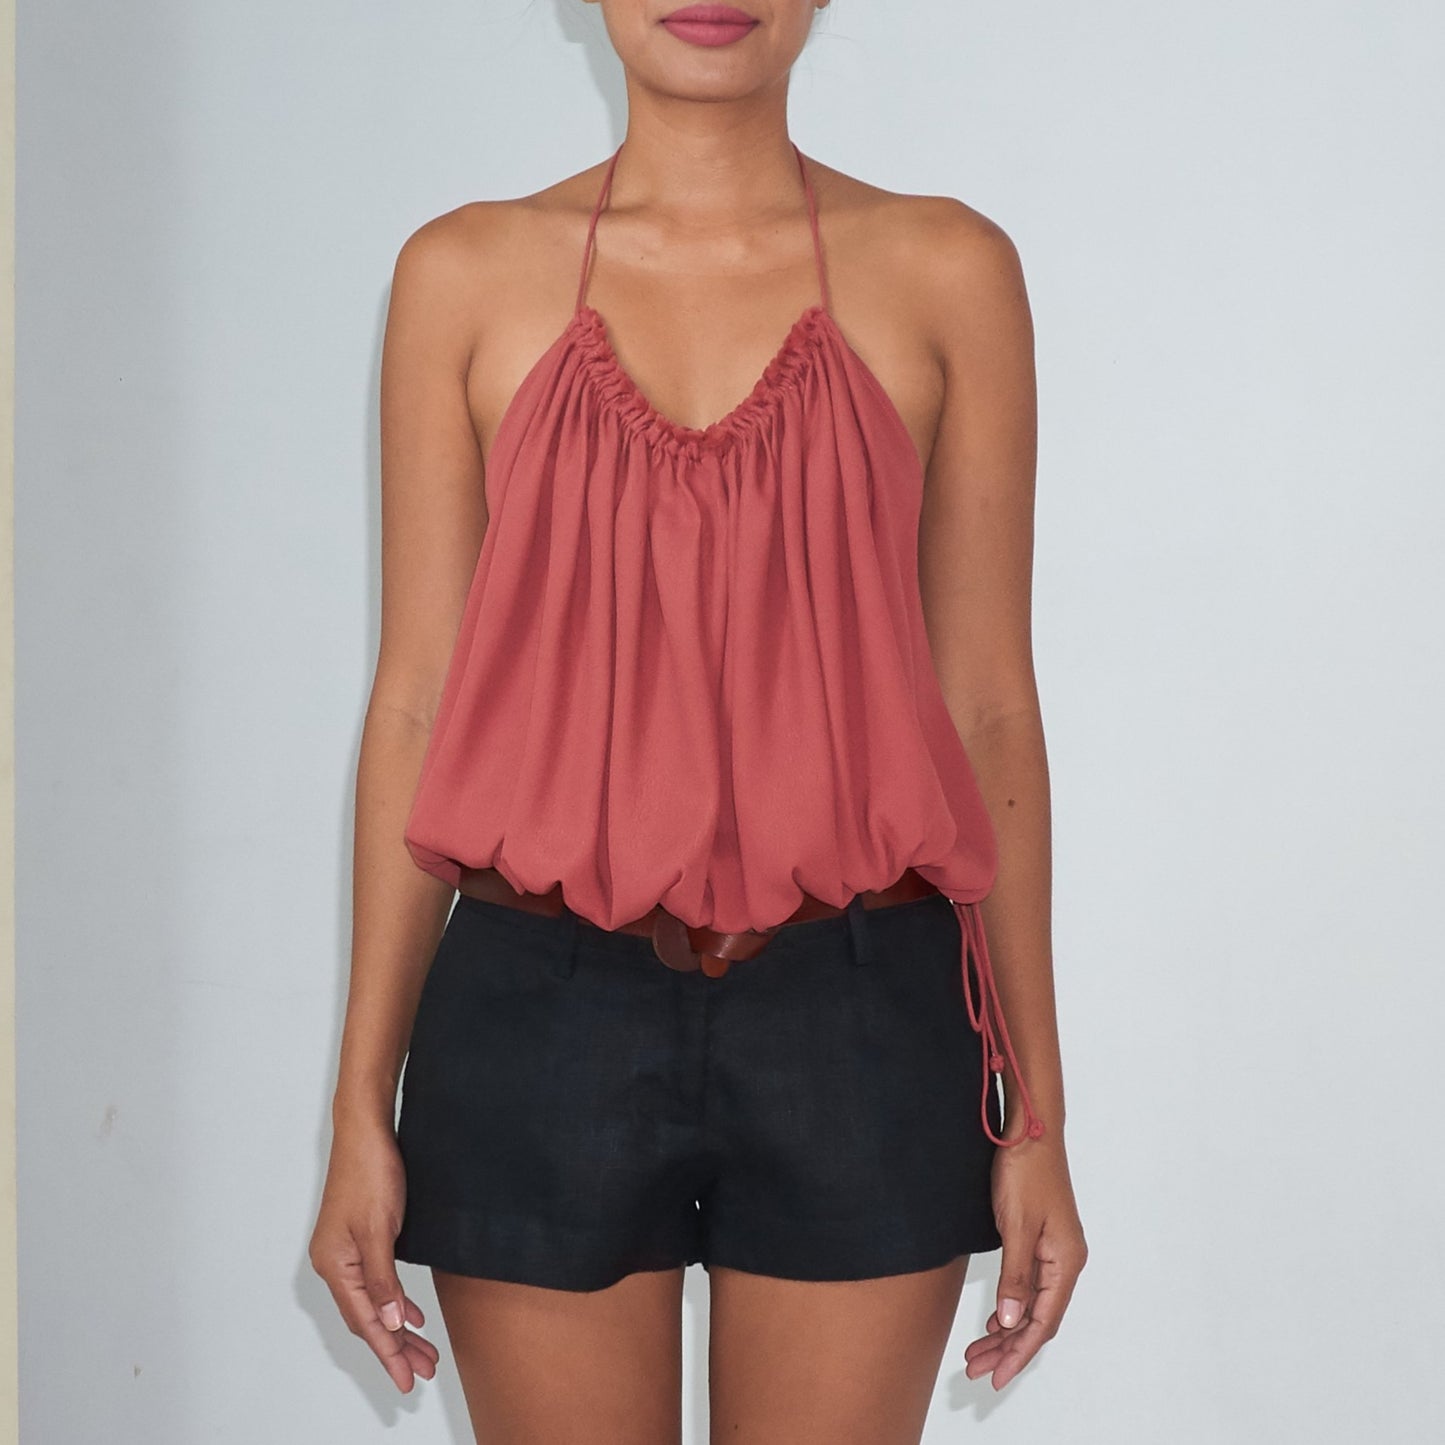 RUSH HALTER TOP - Rayon Fujette Crepe | Dusty Rose